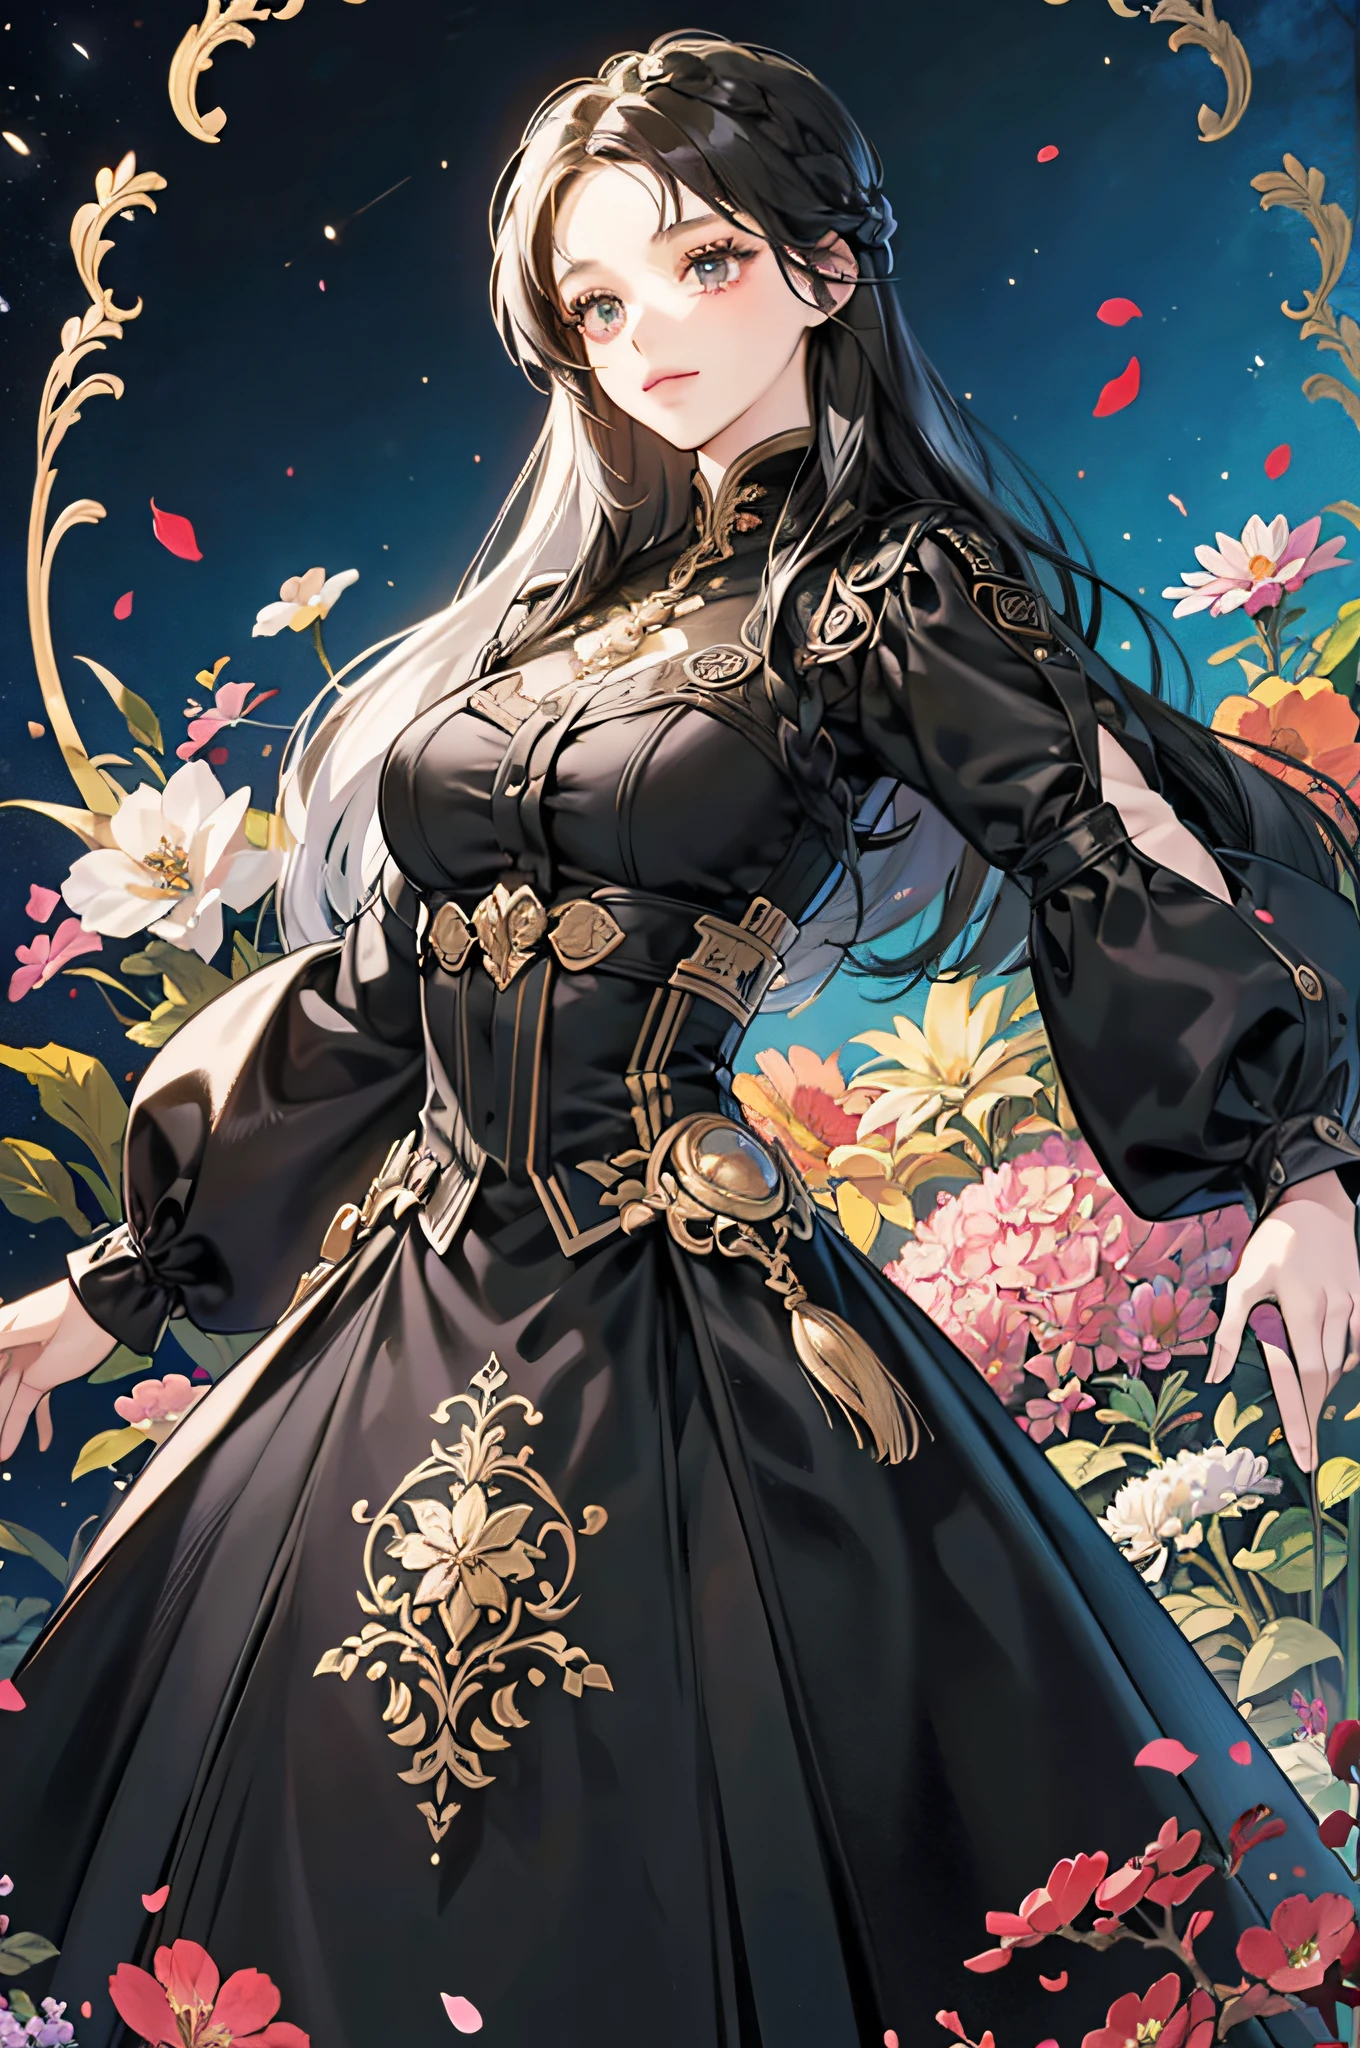 (Masterpiece, Best, Excellent, Official Art, Beautiful Aesthetics: 1.2), (1girl, Mature: 1.3, Adult: 1.3), Long Hair, Black Hair, Braided Side Hair, Very Meticulous, (Fractal Art: 1.1), (Color: 1.4) (Flowers: 1.3), Most Detailed, (Zentangle: 1.2), (Dynamic Pose), (Abstract Background: 1.3), (Shiny Skin), (Multiple Colors: 1.4), Black Eyes, Dark theme, Dark Clothing